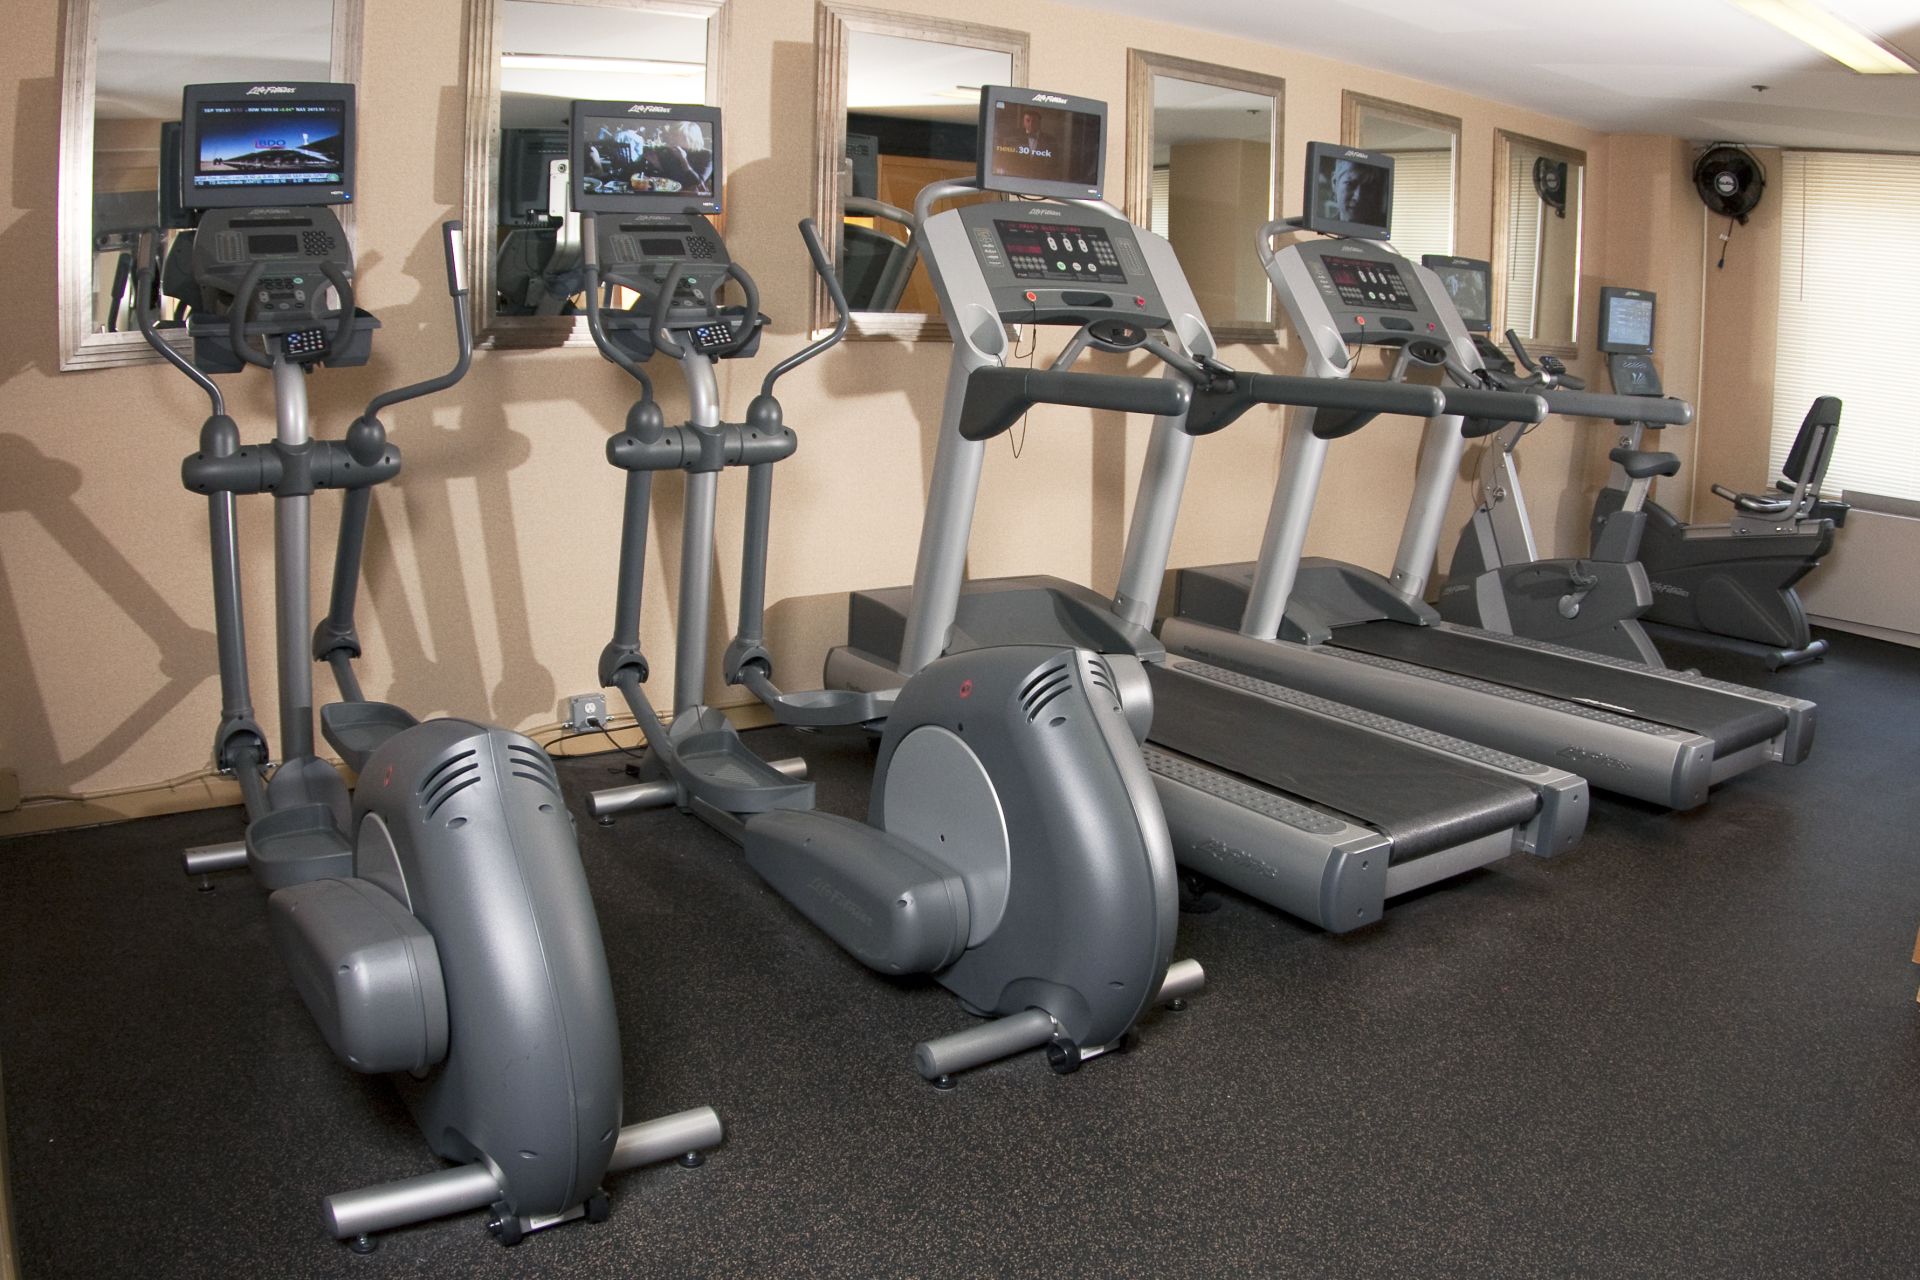 Fitness center amenities in NYC hotel